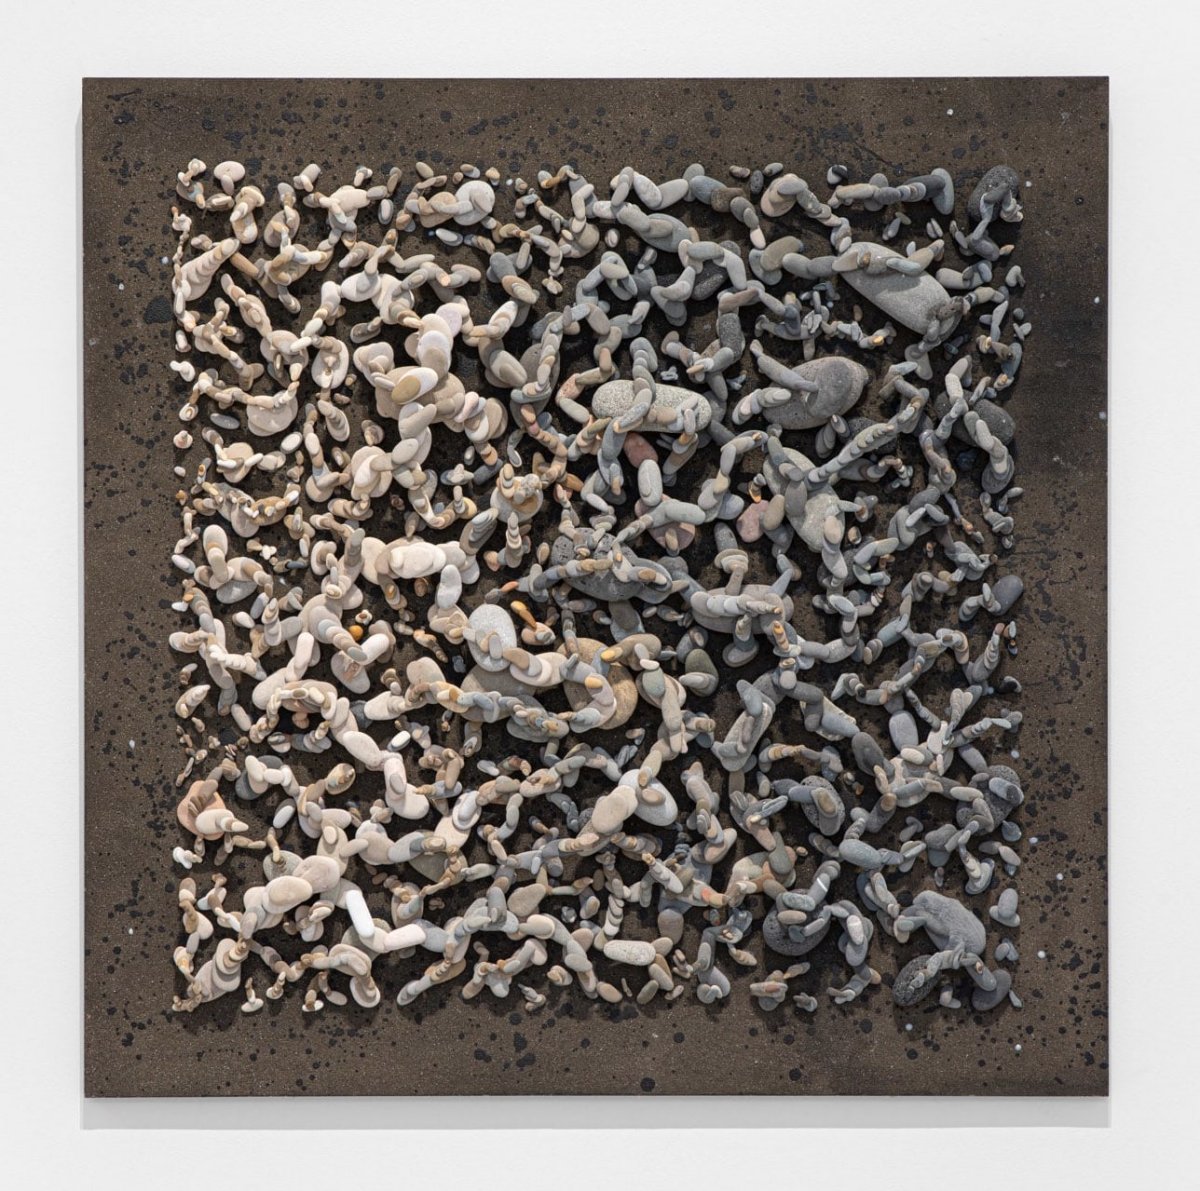 Mary Bauermeister, Giant-Chaos, 2015 